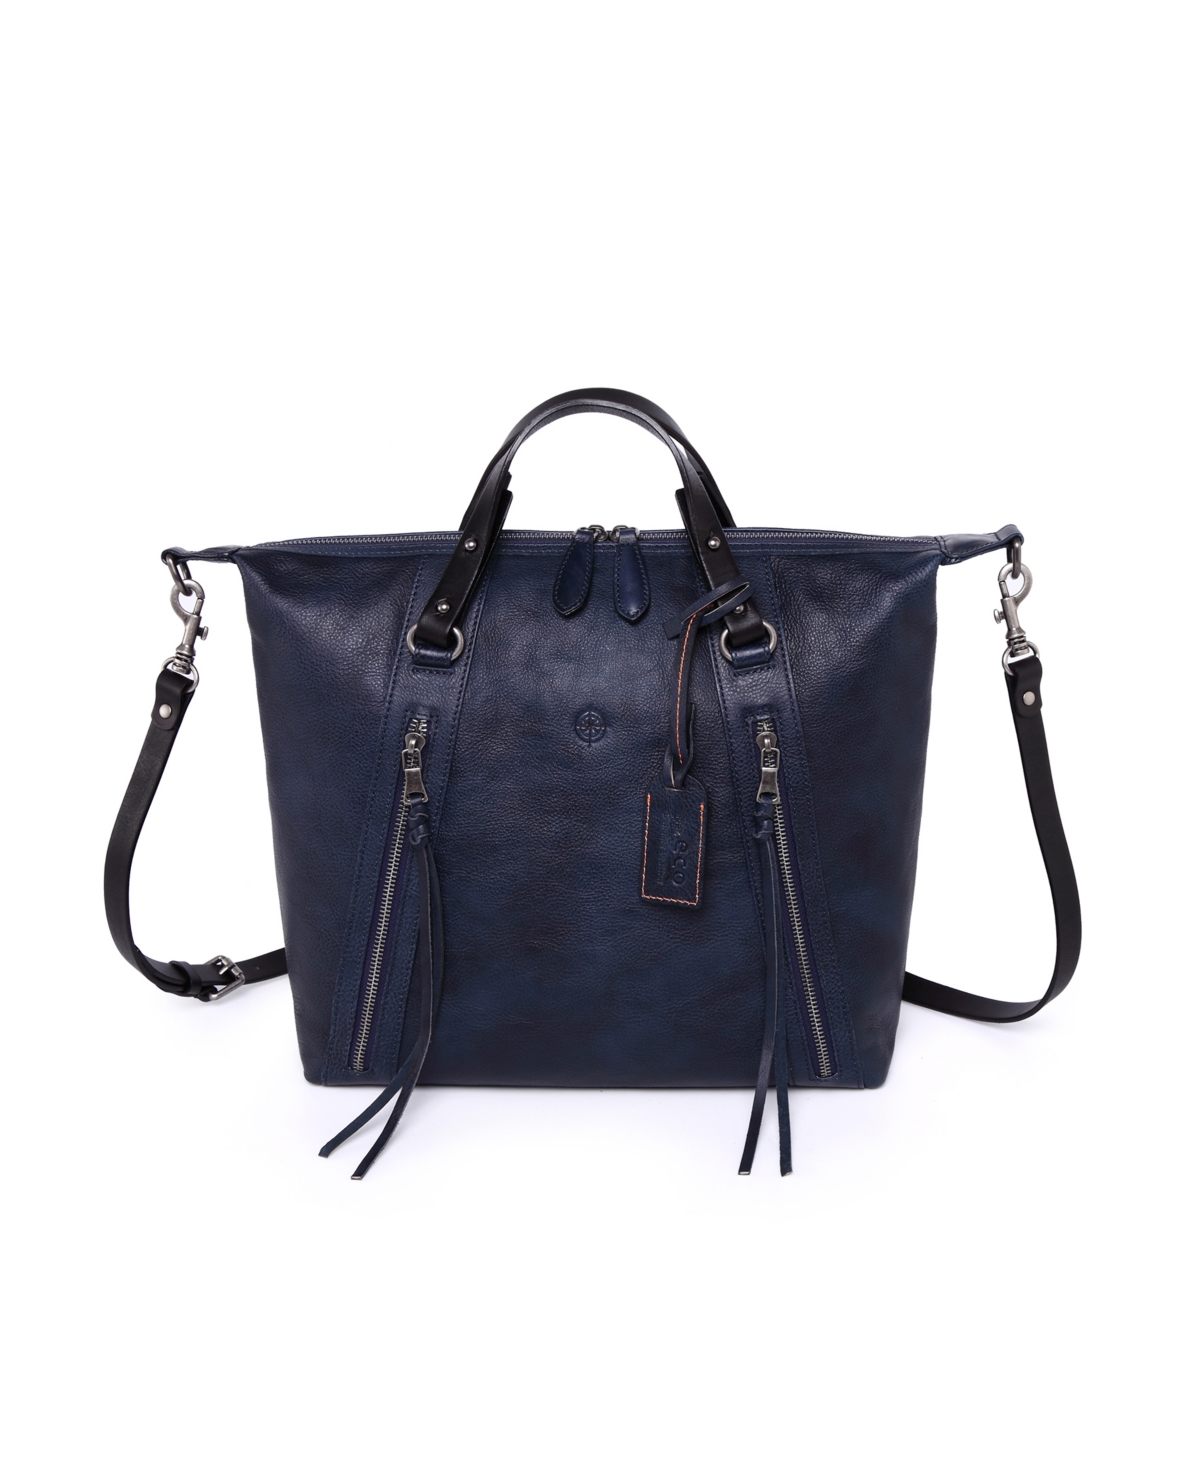 Mossy Creek Leather Tote Bag - Navy